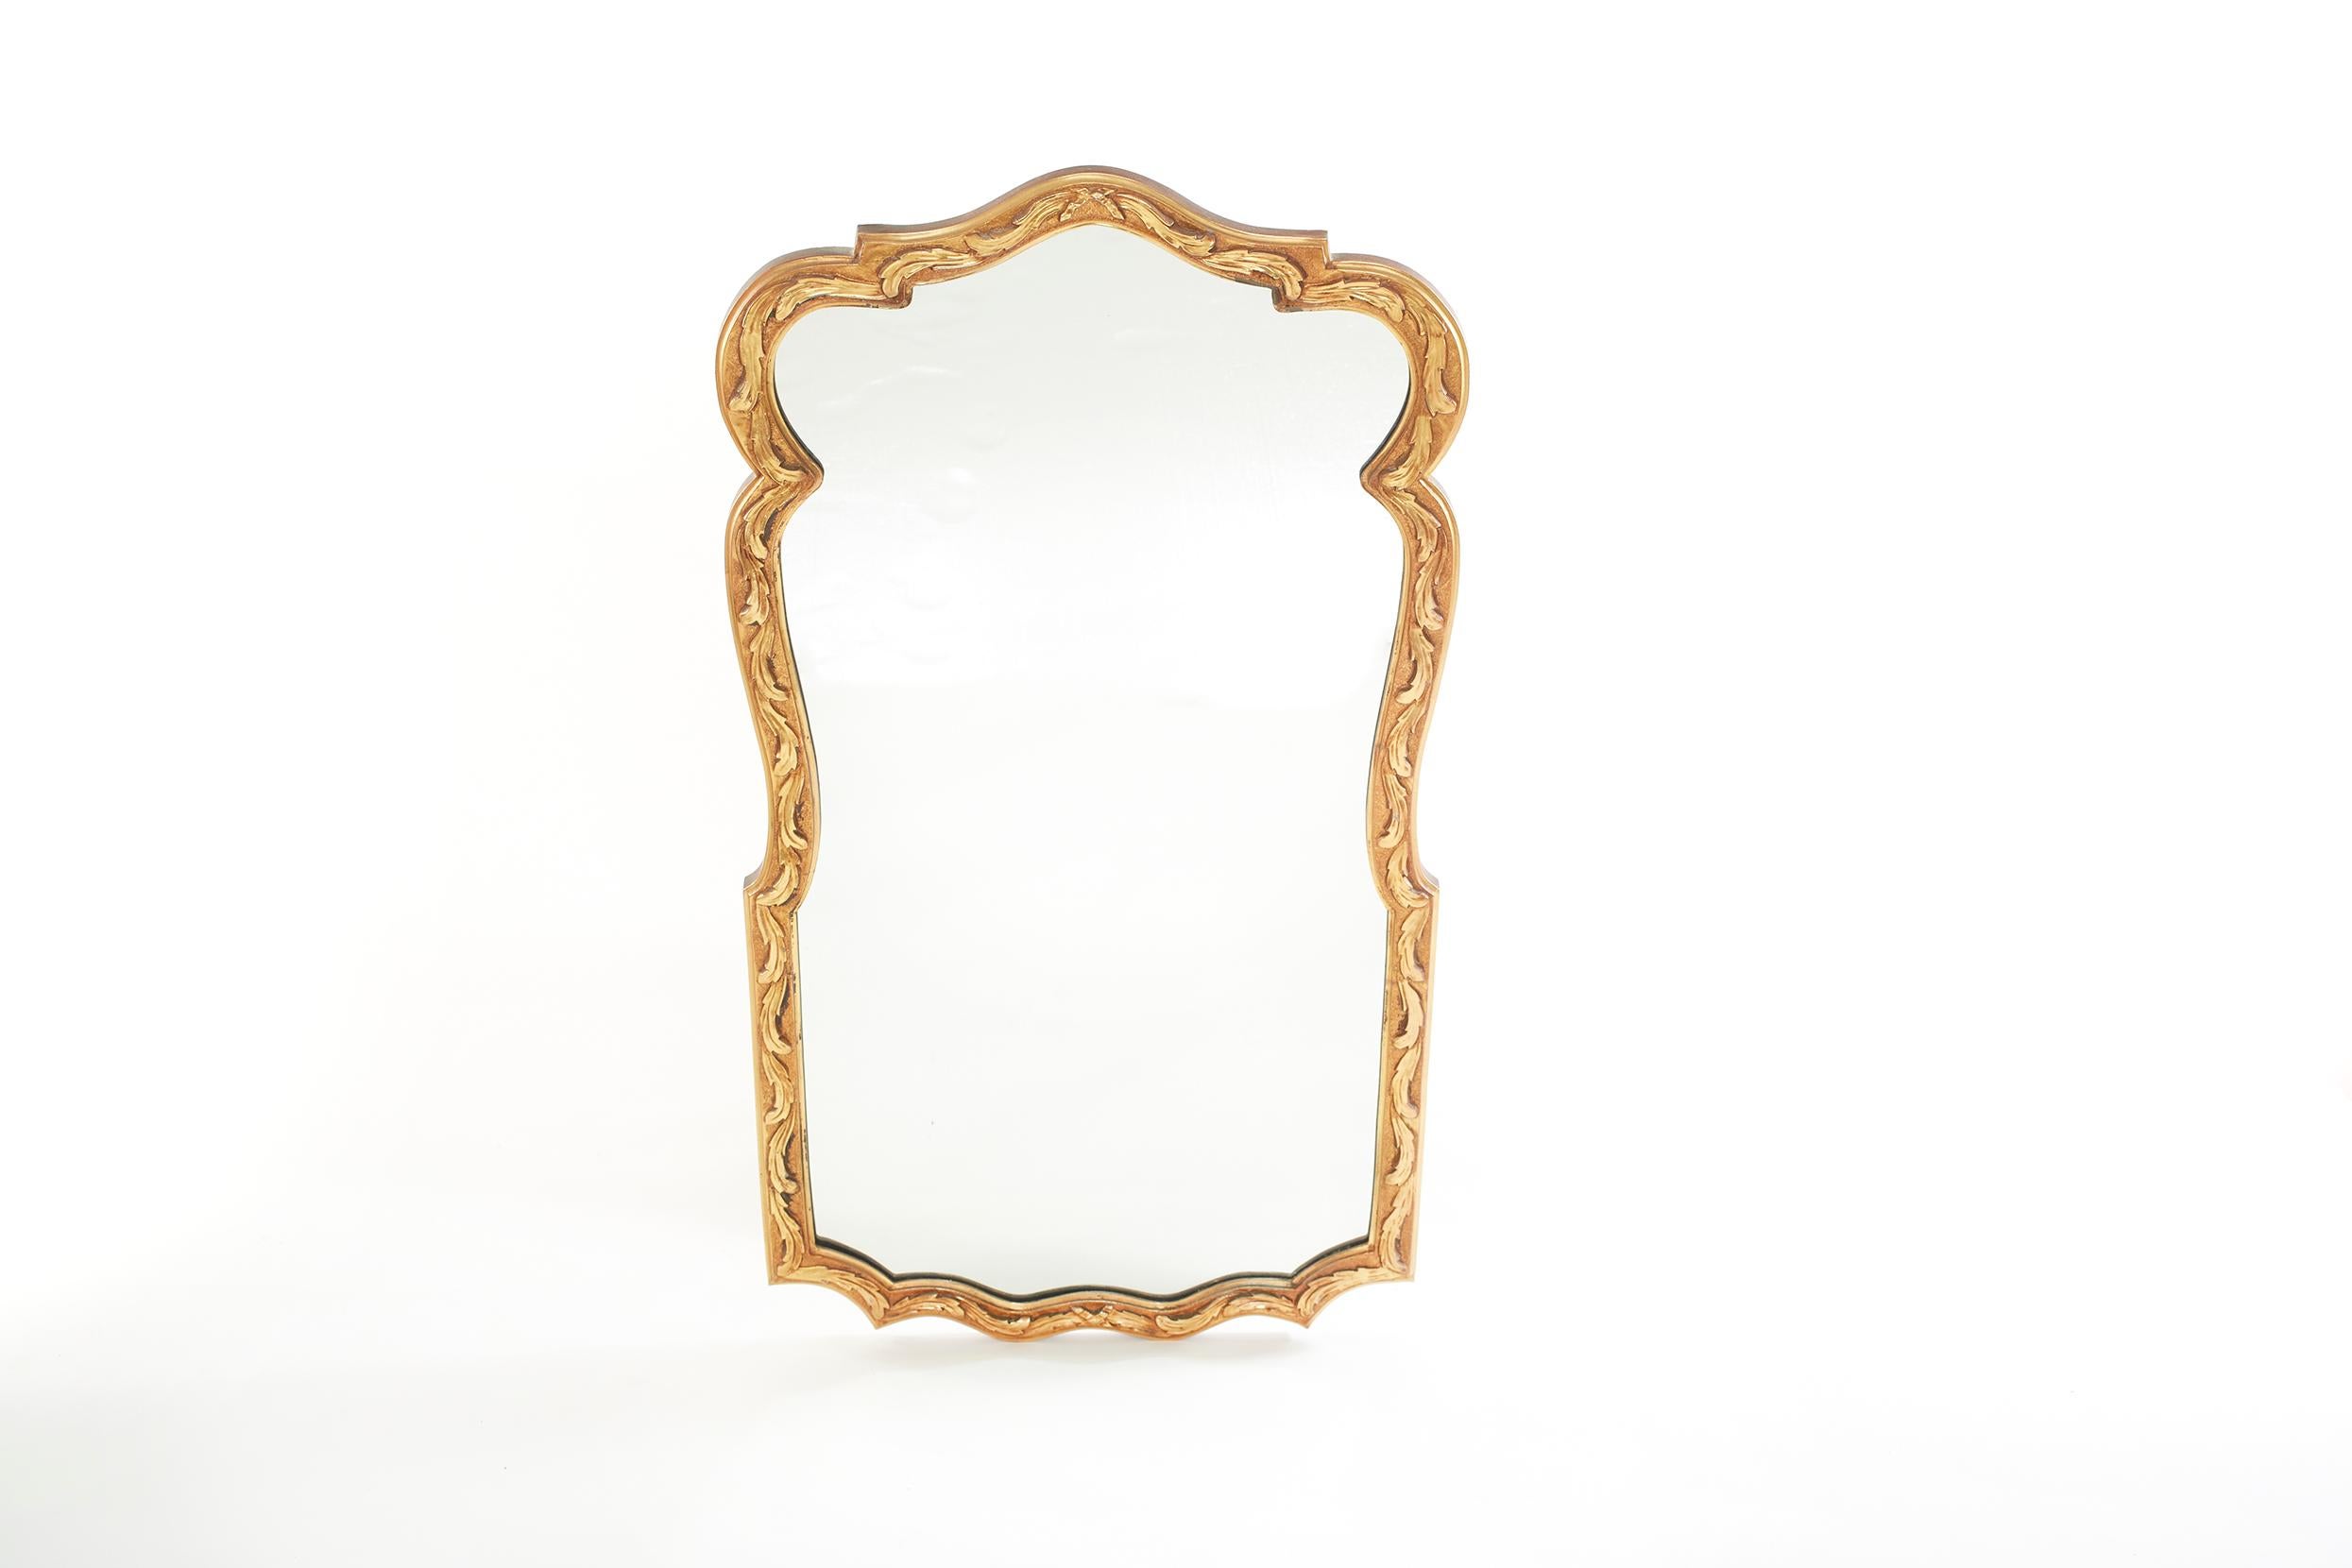 Beautiful pair of gilt wood framed beveled hanging wall mirror in a geometric shape with hand carved design details motif. The mirror is in good condition. Minor wear consistent with age / use. The gilt wood frame measure 48 inches high X 26 inches